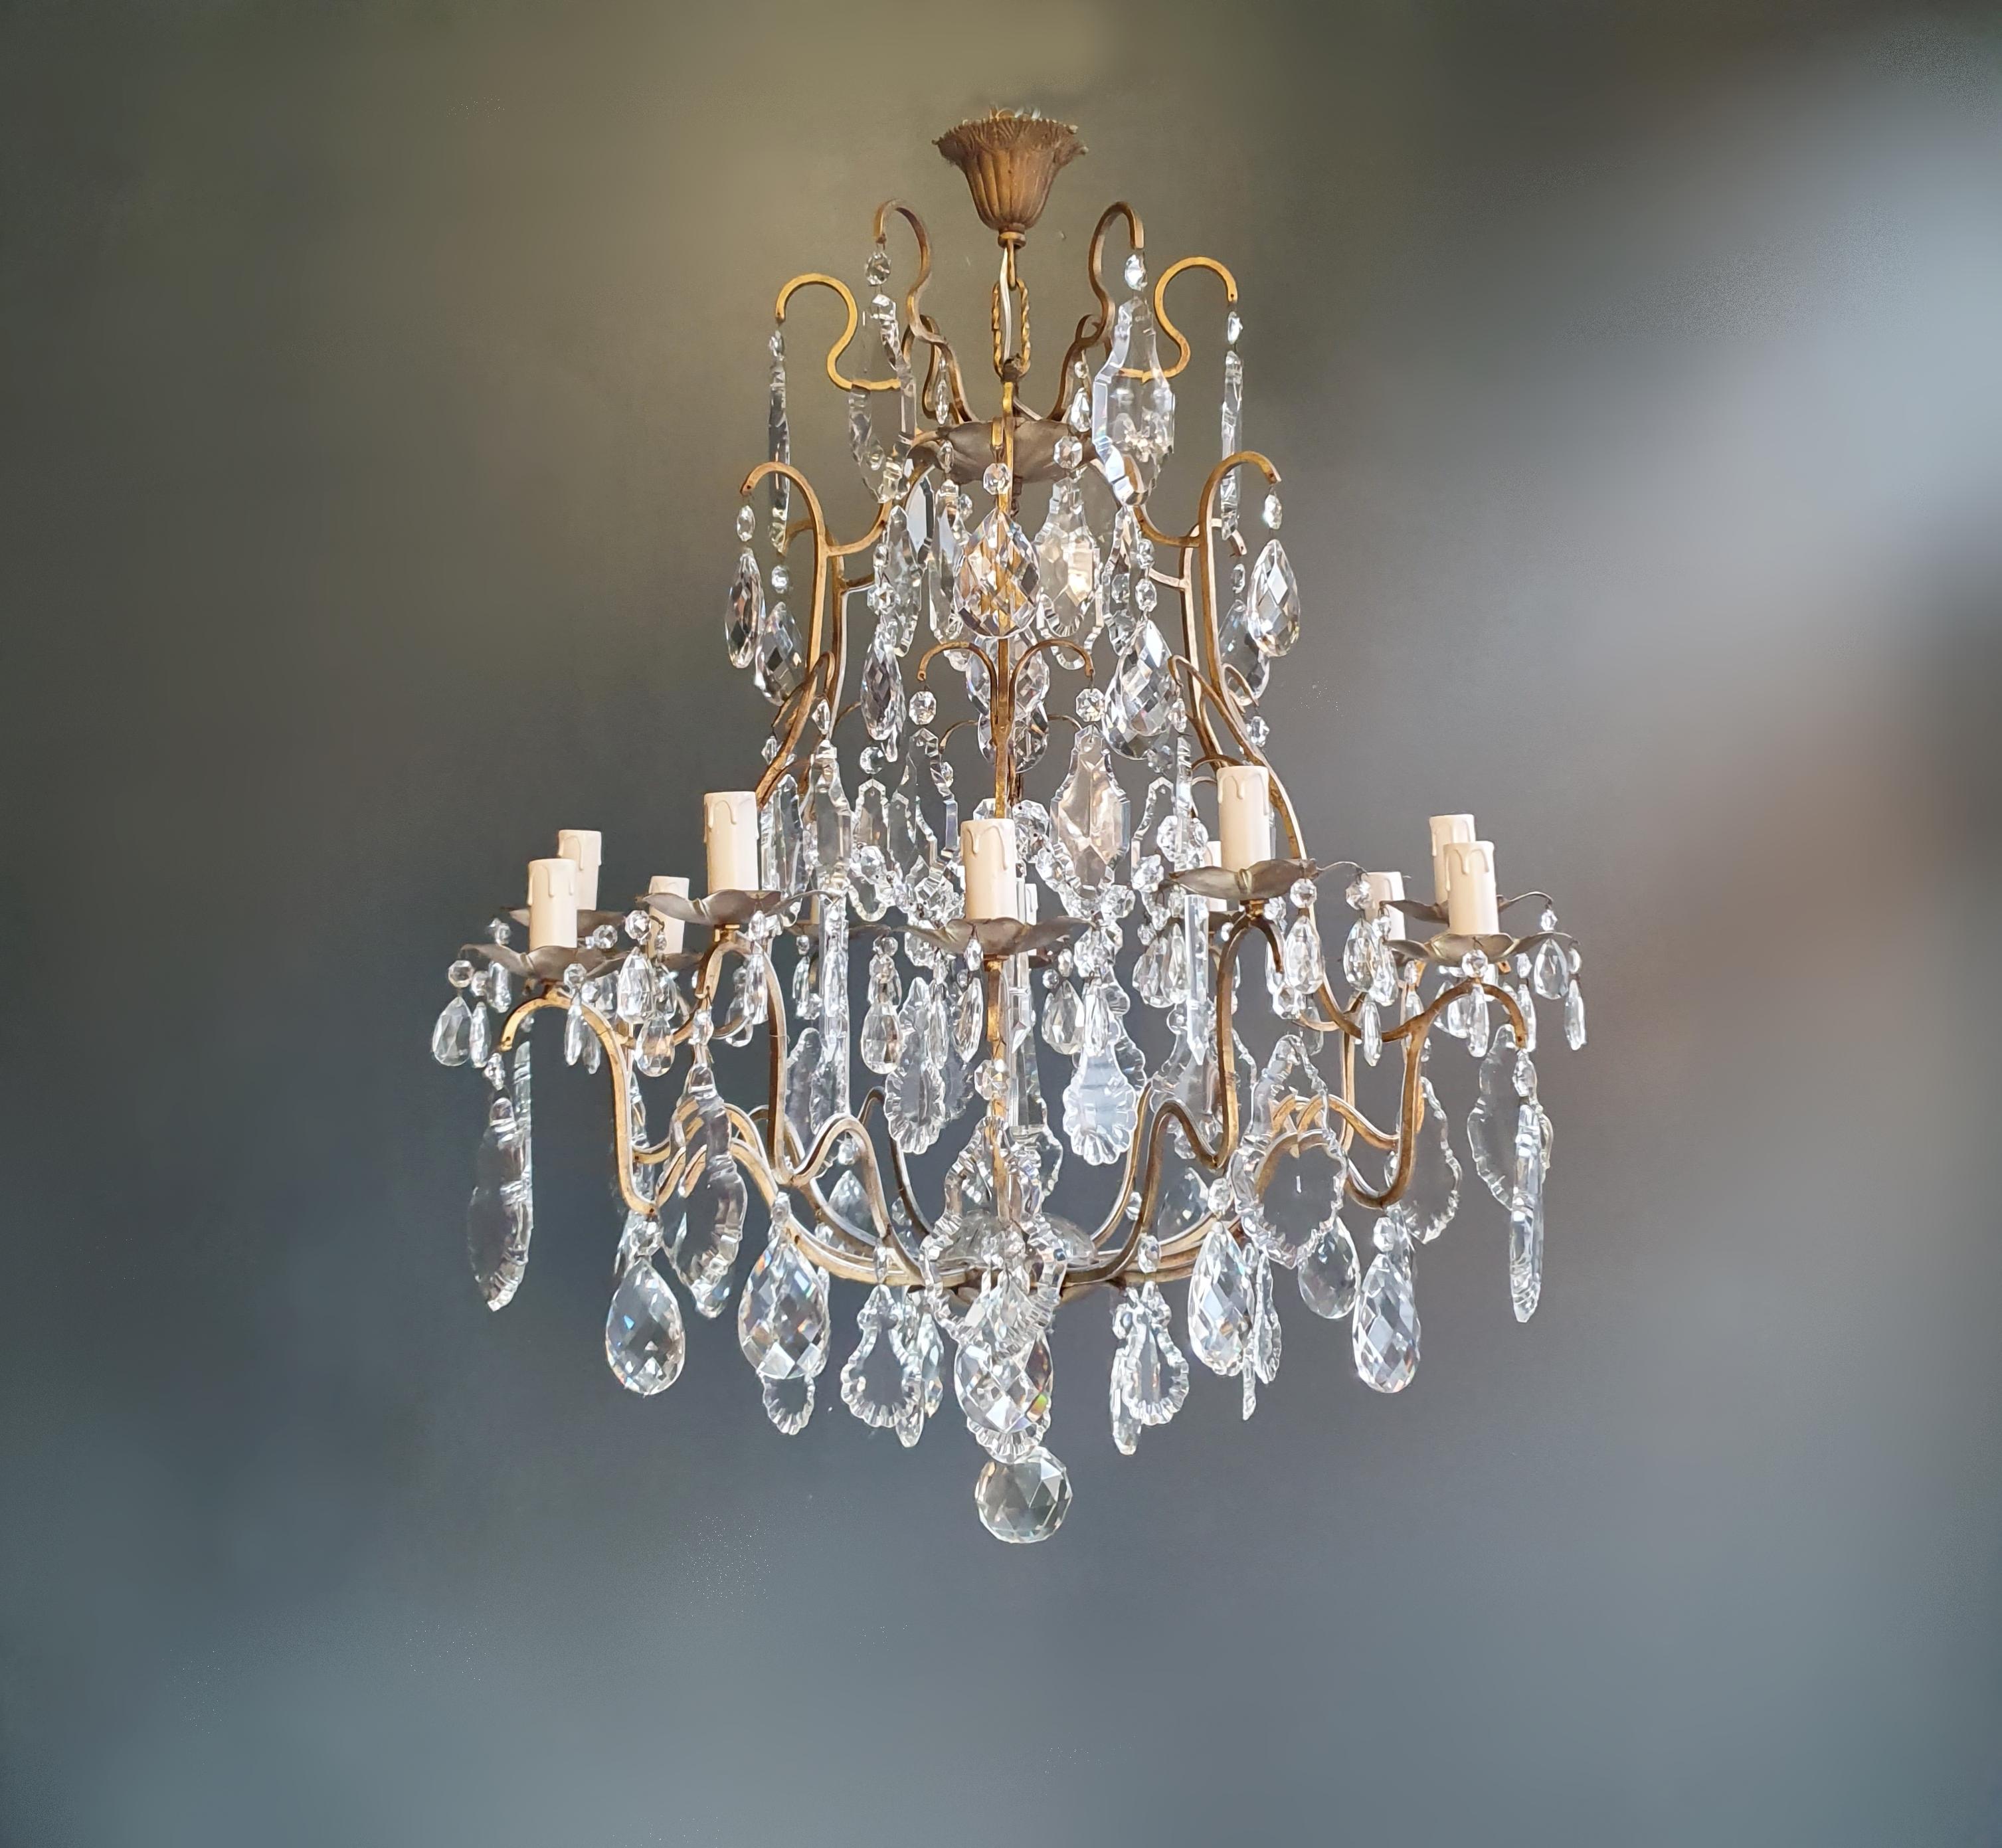 Fine brass crystal chandelier antique ceiling lamp lustre Art Nouveau lamp

Measures: Total height 90 cm, height without chain 85 cm diameter 73 cm. Weight (approximately) 15kg.

Number of lights: 12-light bulb sockets: E14
Material: Brass,